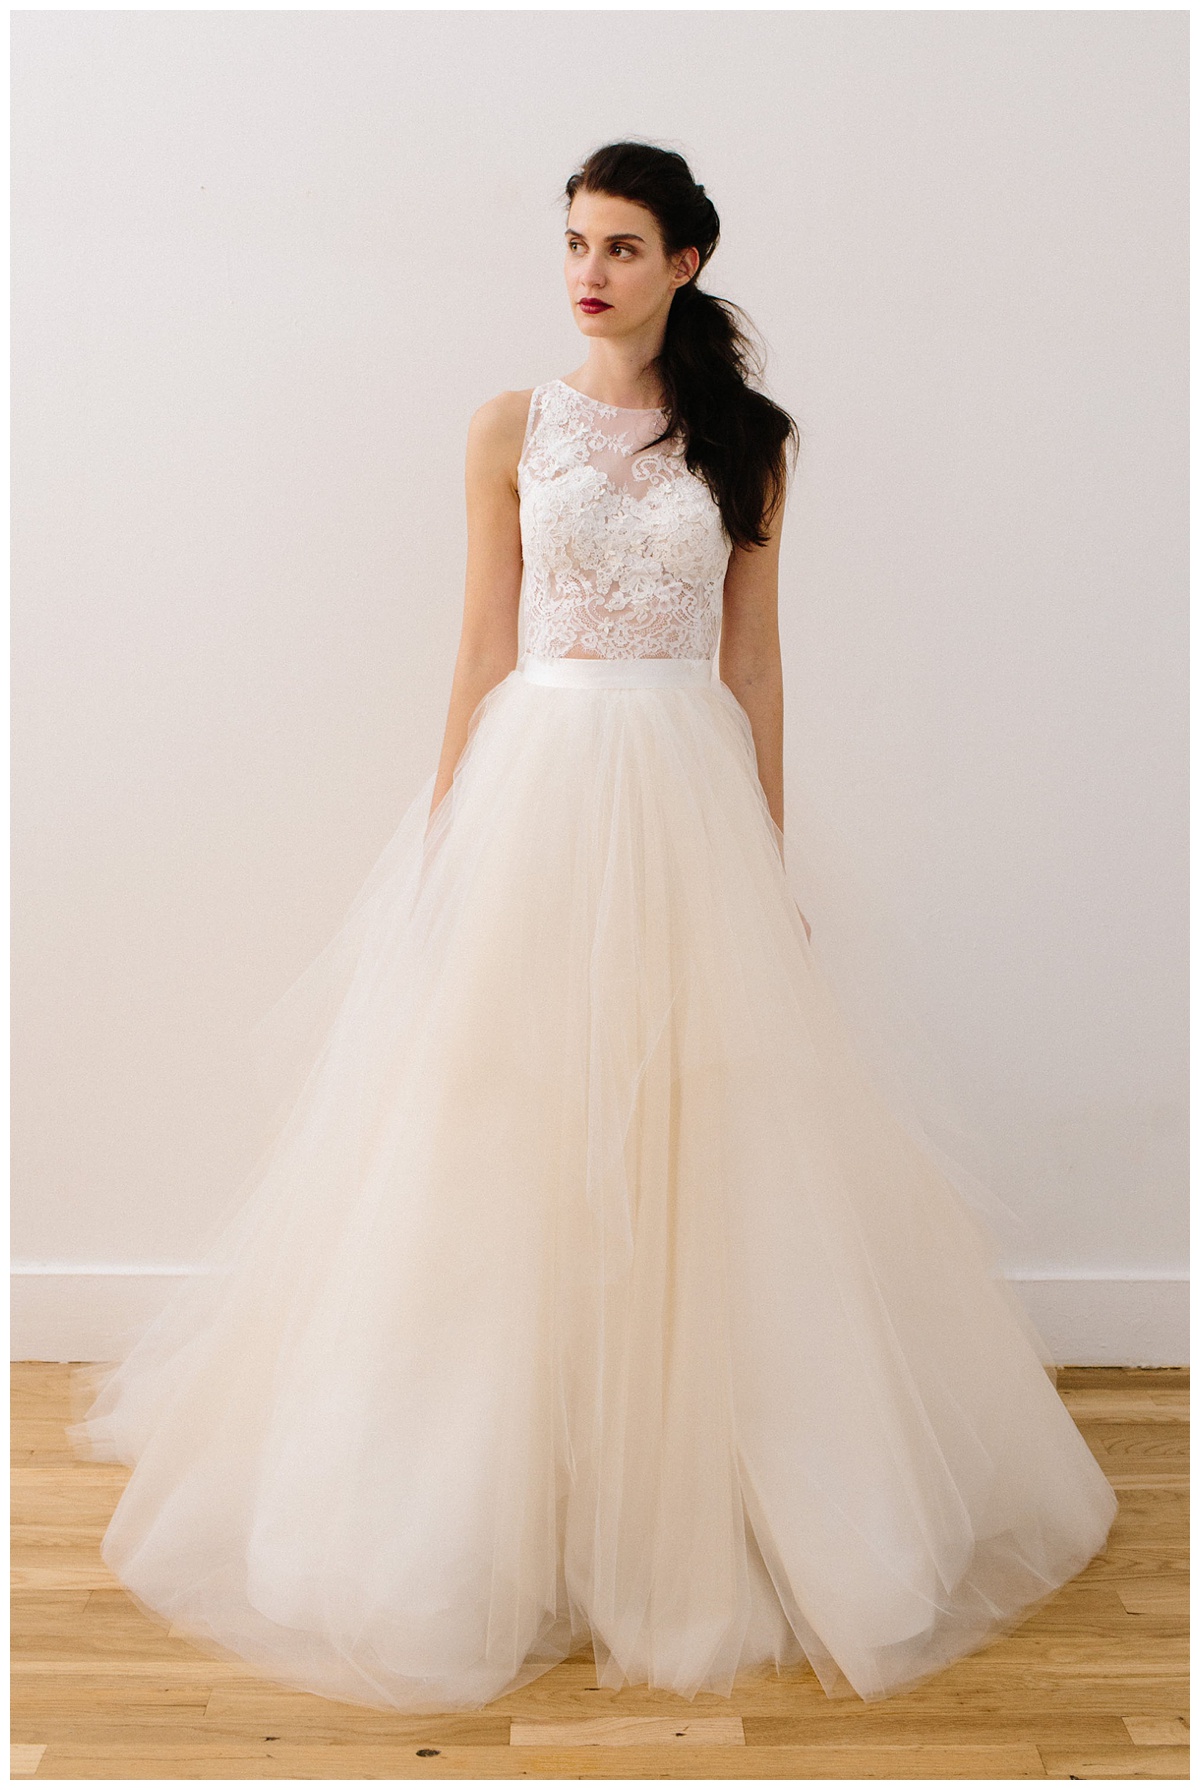 star skirt by lea ann belter wedding dress designer photo available in half sizes ensuring the perfect fit